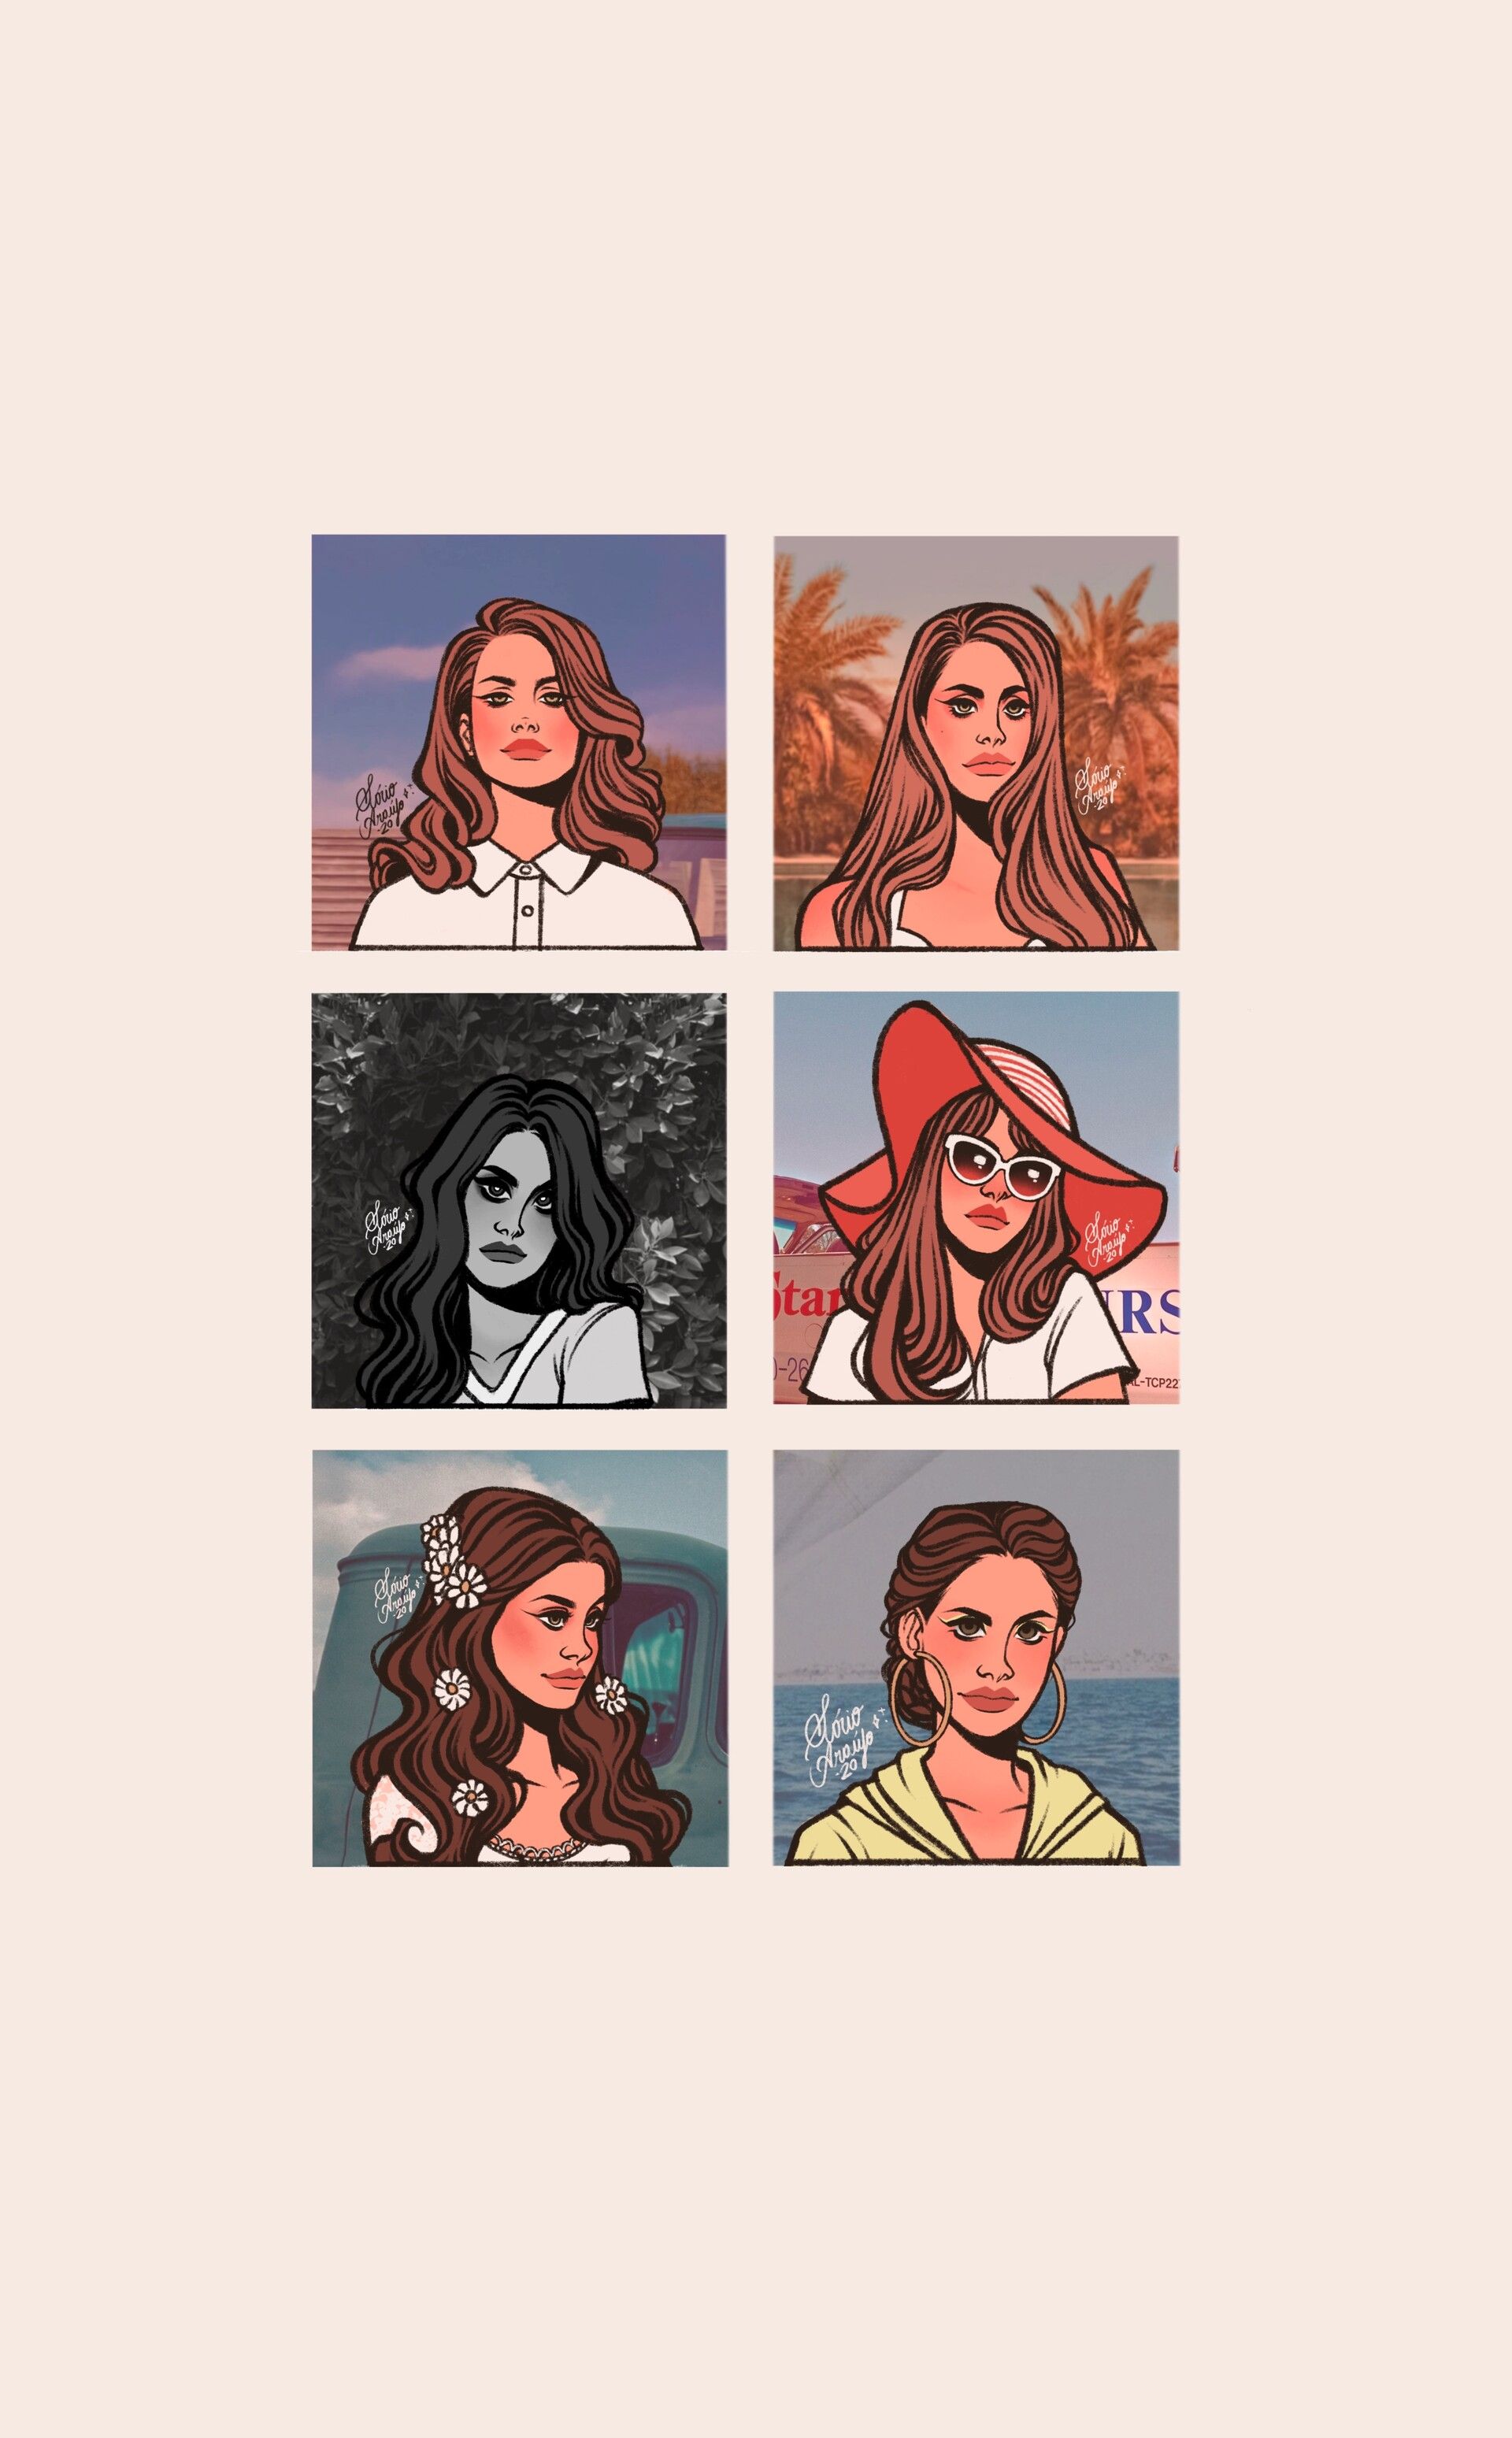 Six different illustrations of the same woman in different outfits and settings - Lana Del Rey